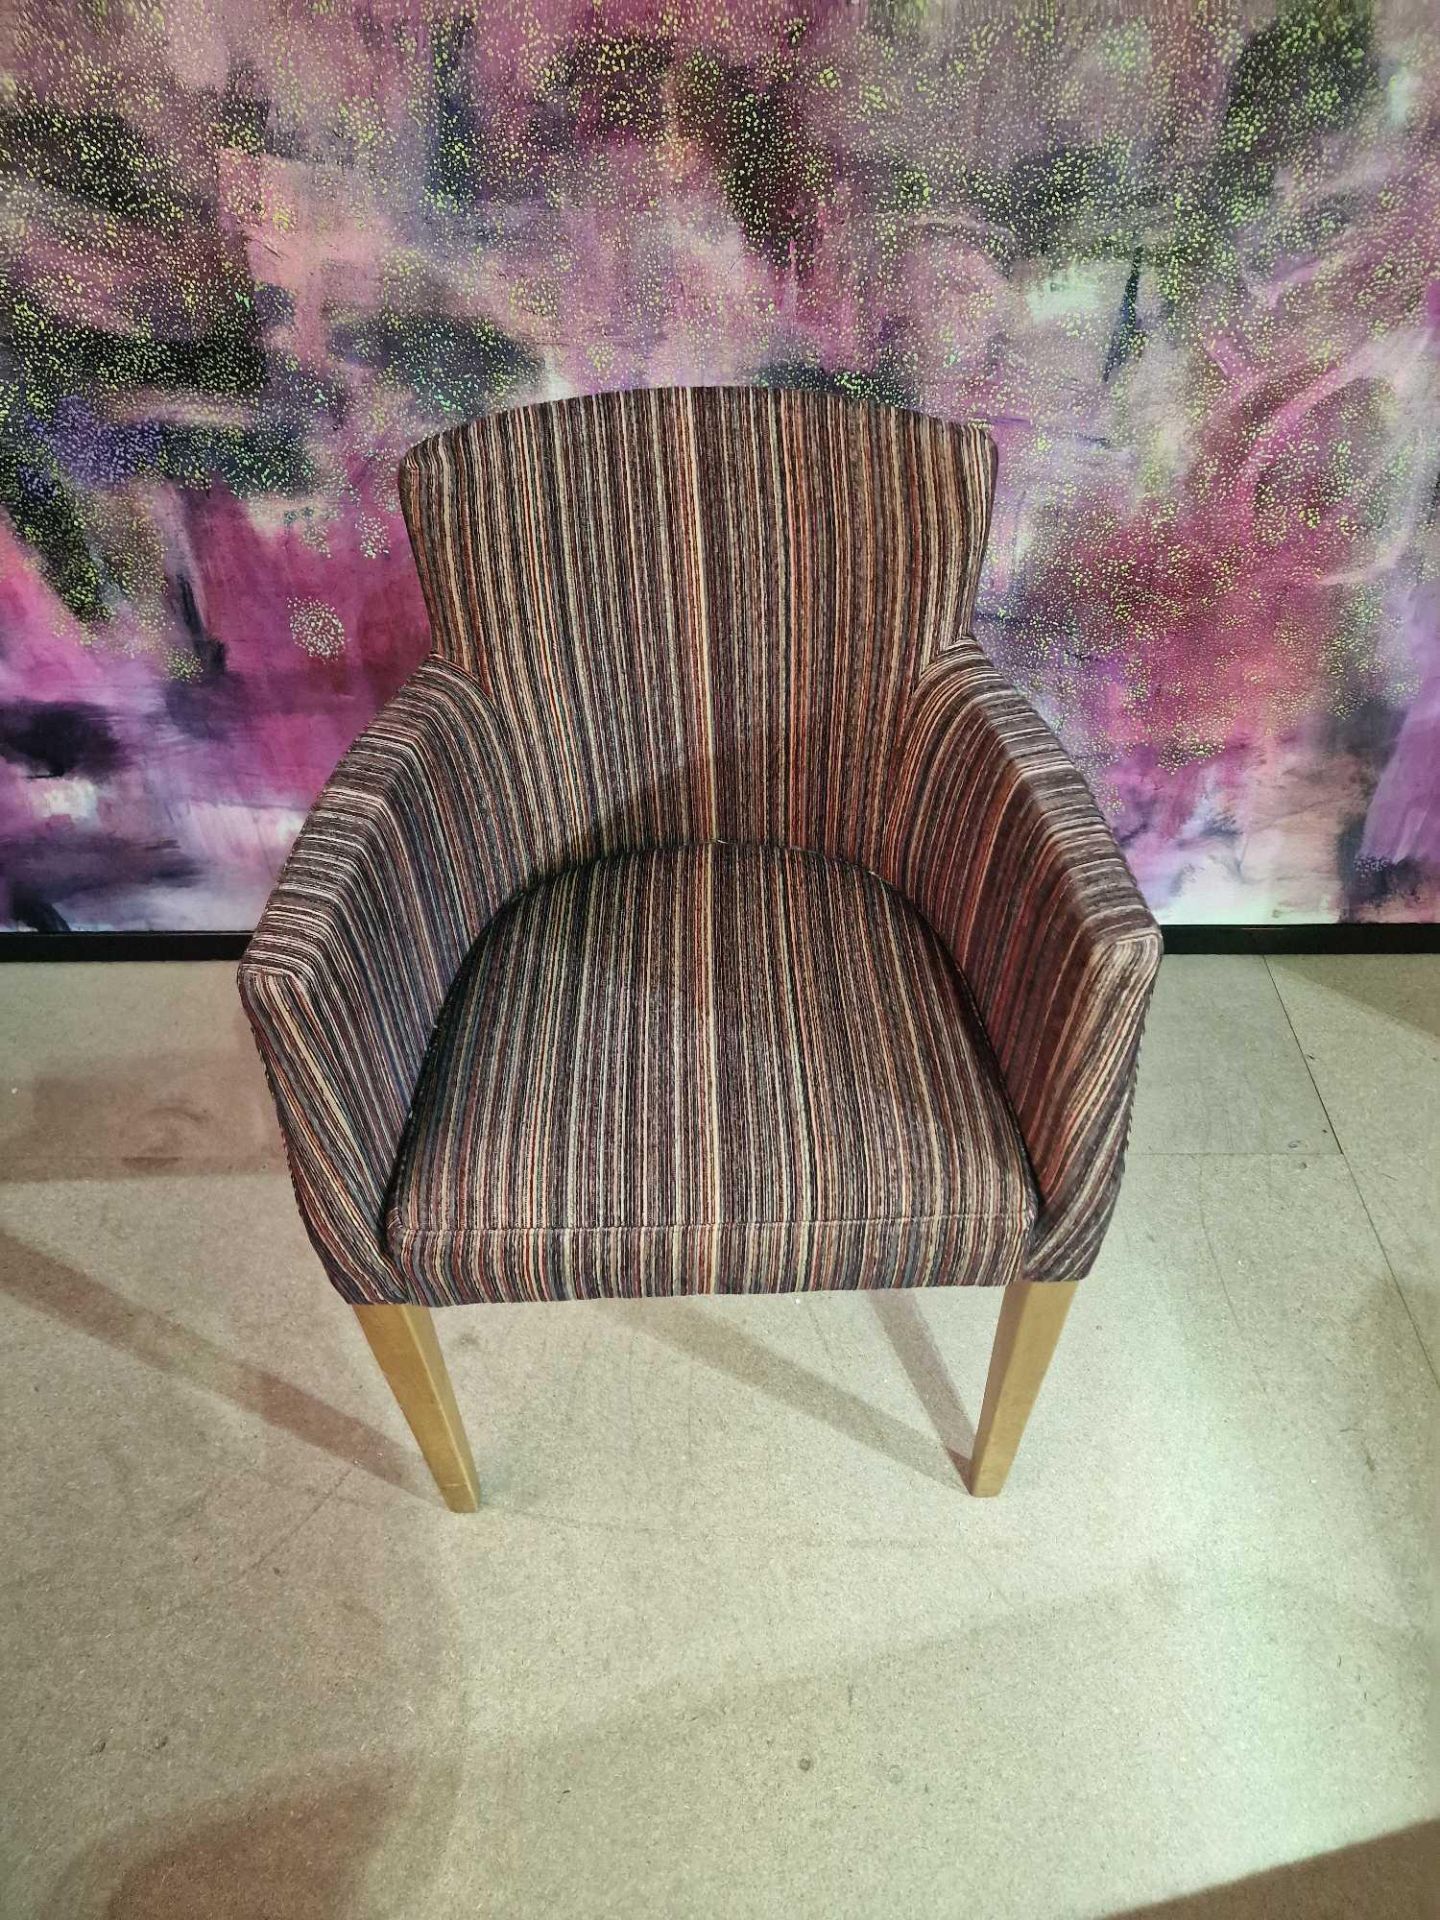 Contemporary dining chair Upholstered in a modern striped pattern fabric, the high arm rests and - Image 2 of 3